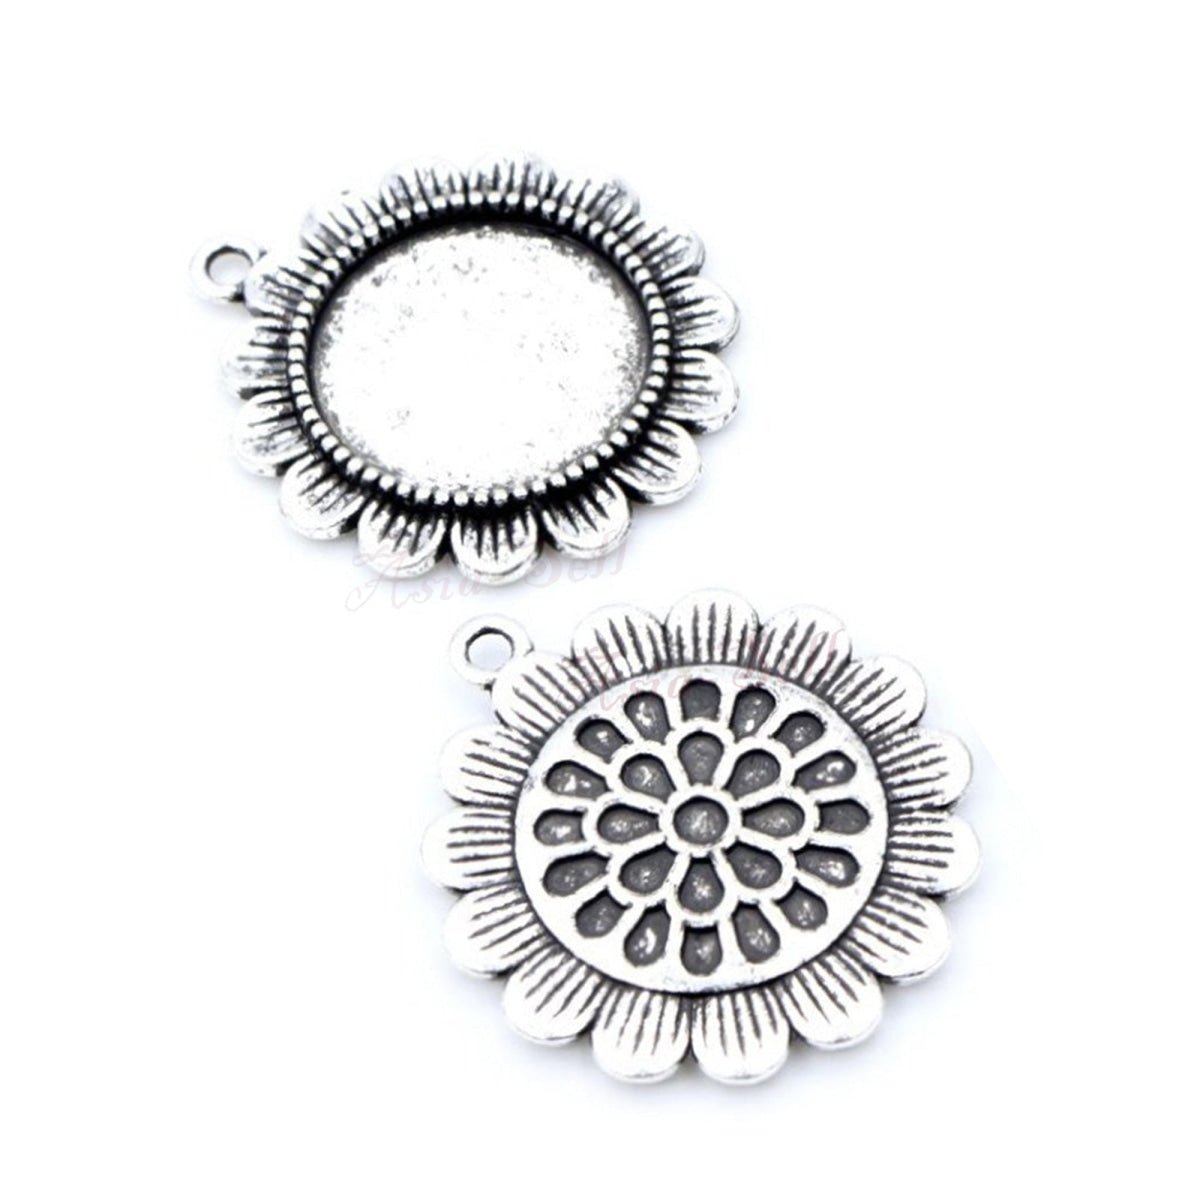 5pcs 20mm Inner Size Antique Silver Plated Black Bronze Cabochon Base Setting Charms Pendant Metal - Antique Silver - - Asia Sell